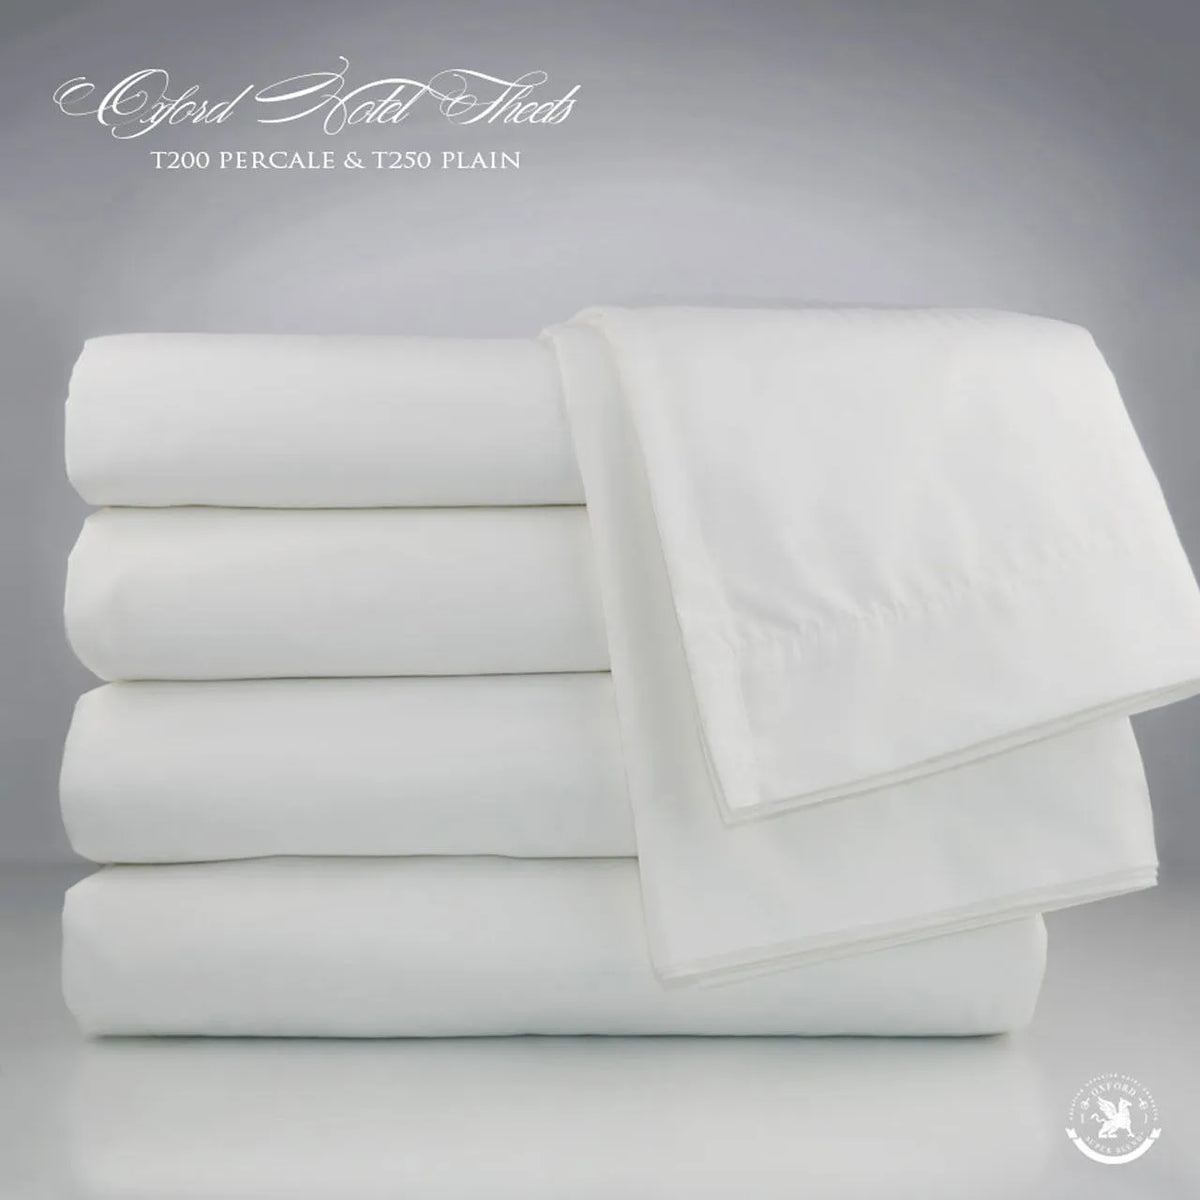 Fitted Sheets - Oxford T200 Superblend Bed Linen